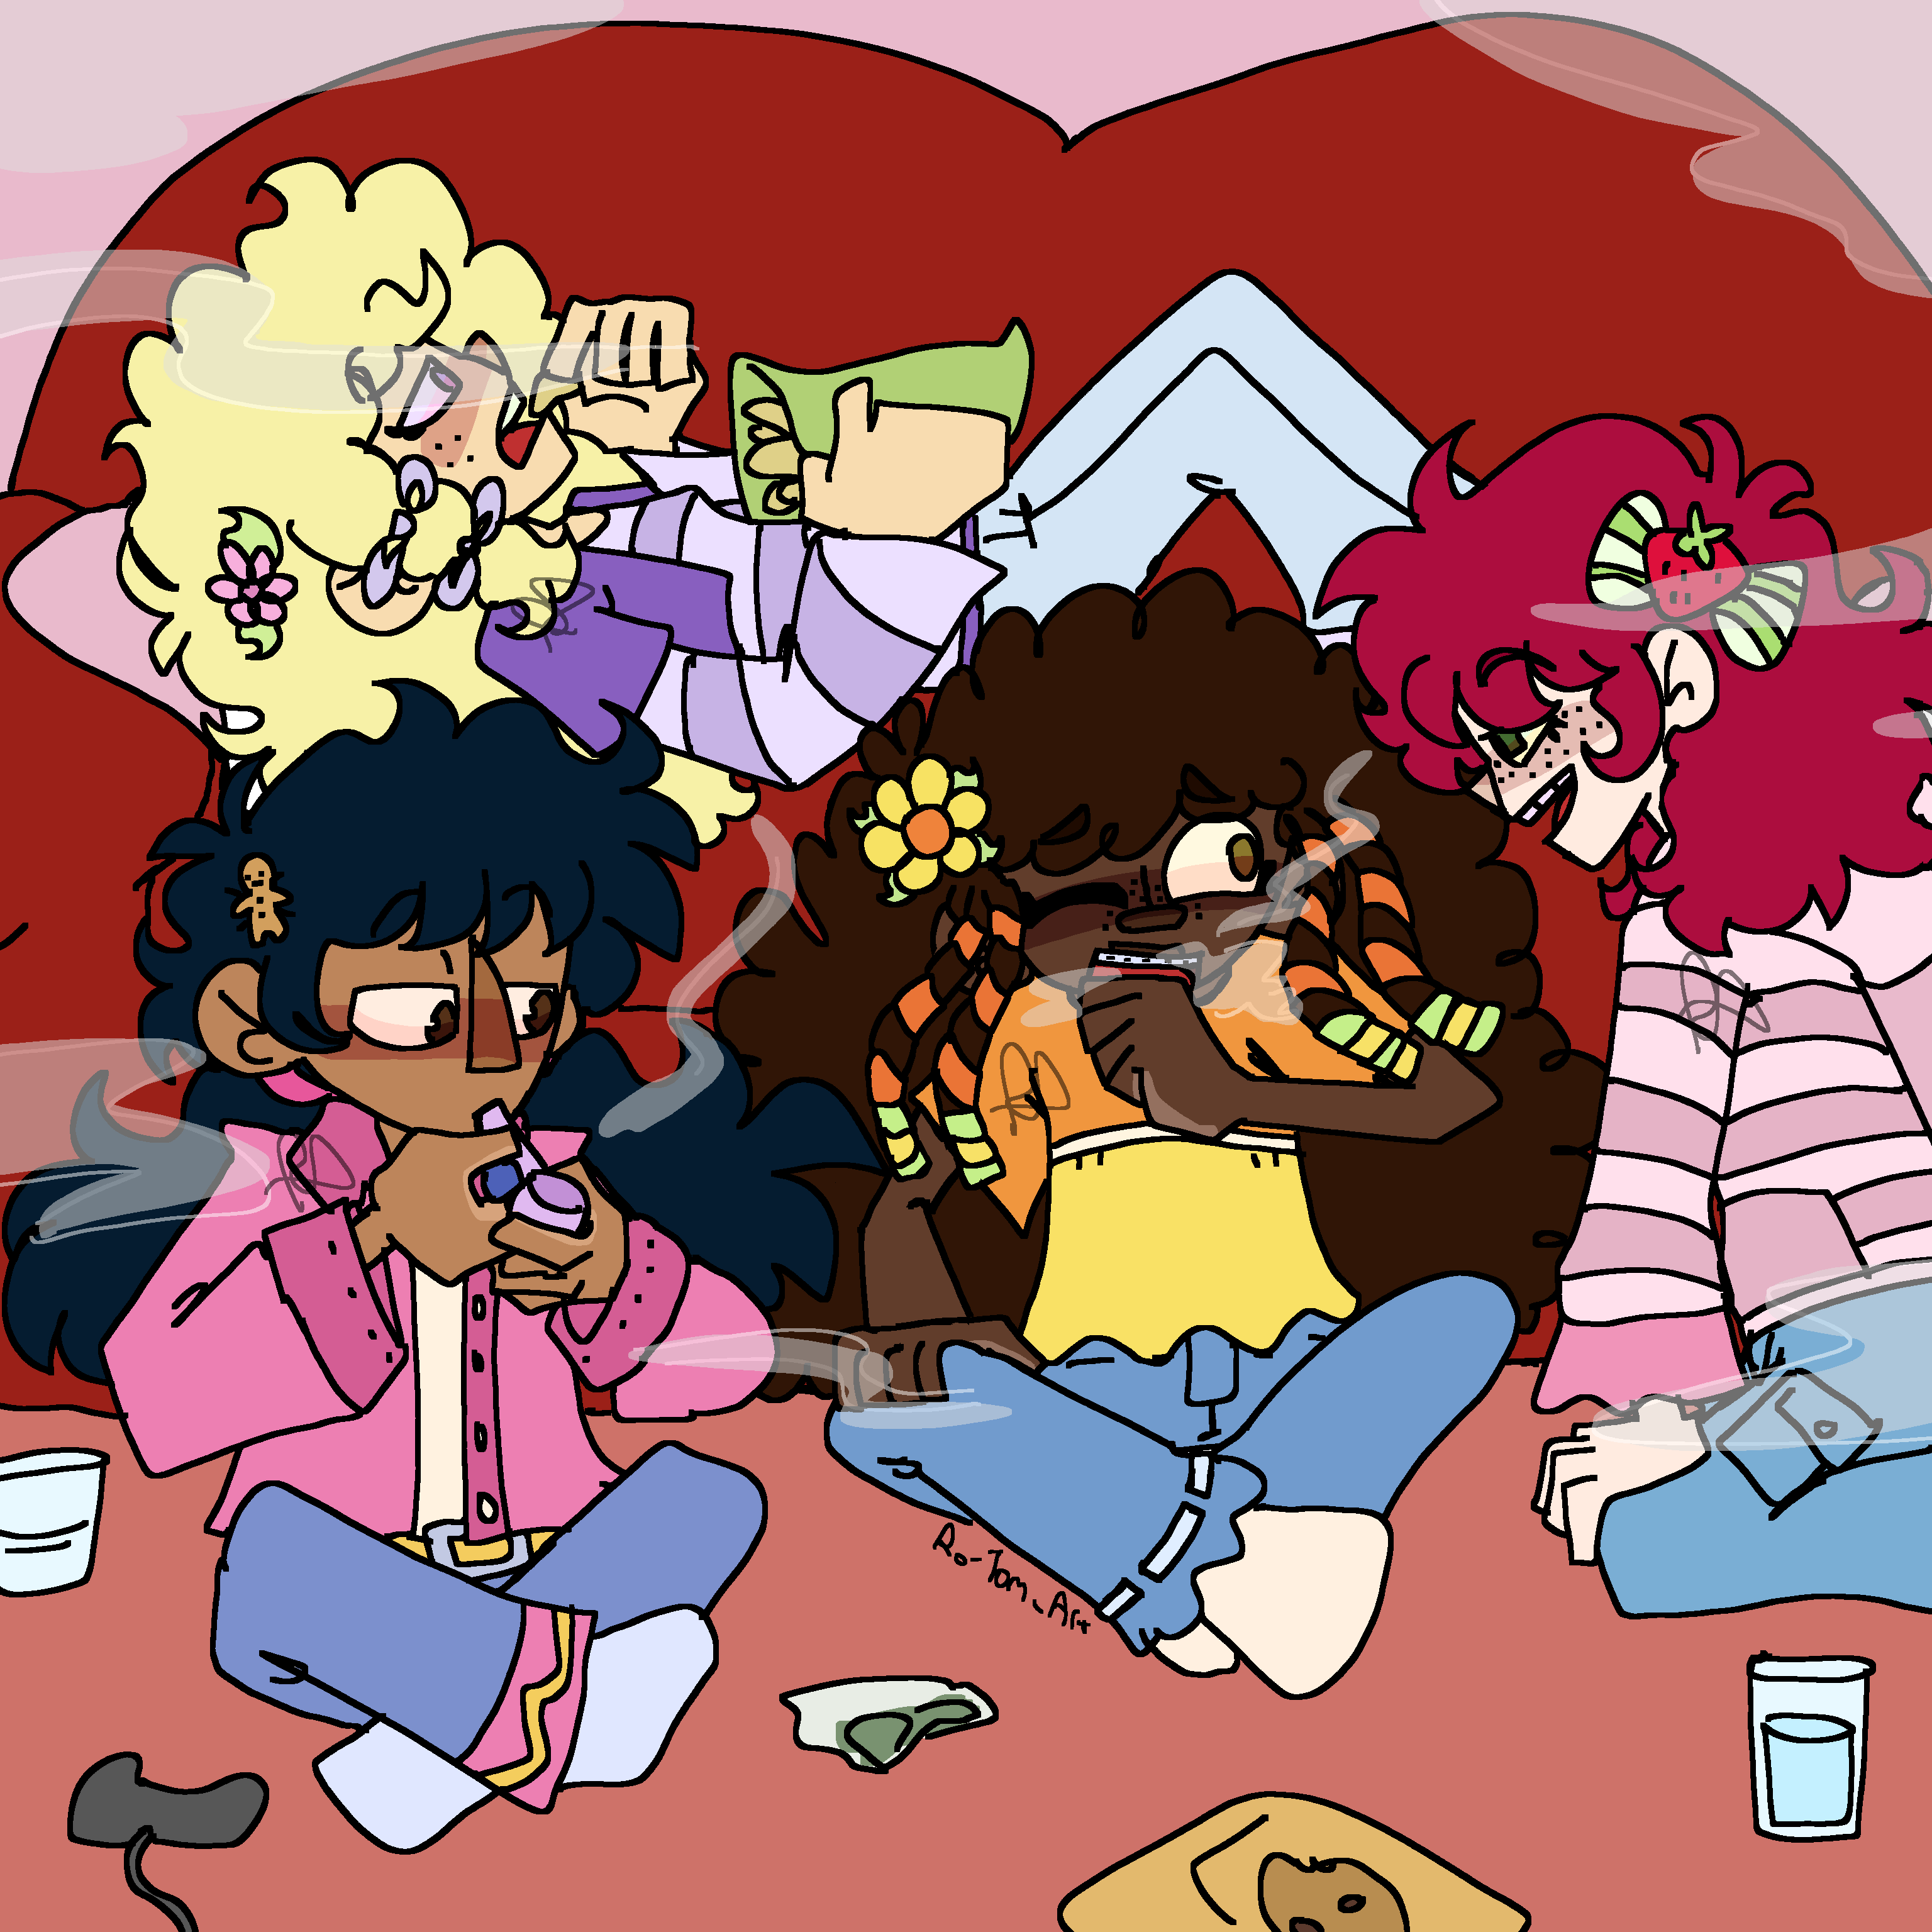 Weed smoking girlfriends by RotomArt on DeviantArt